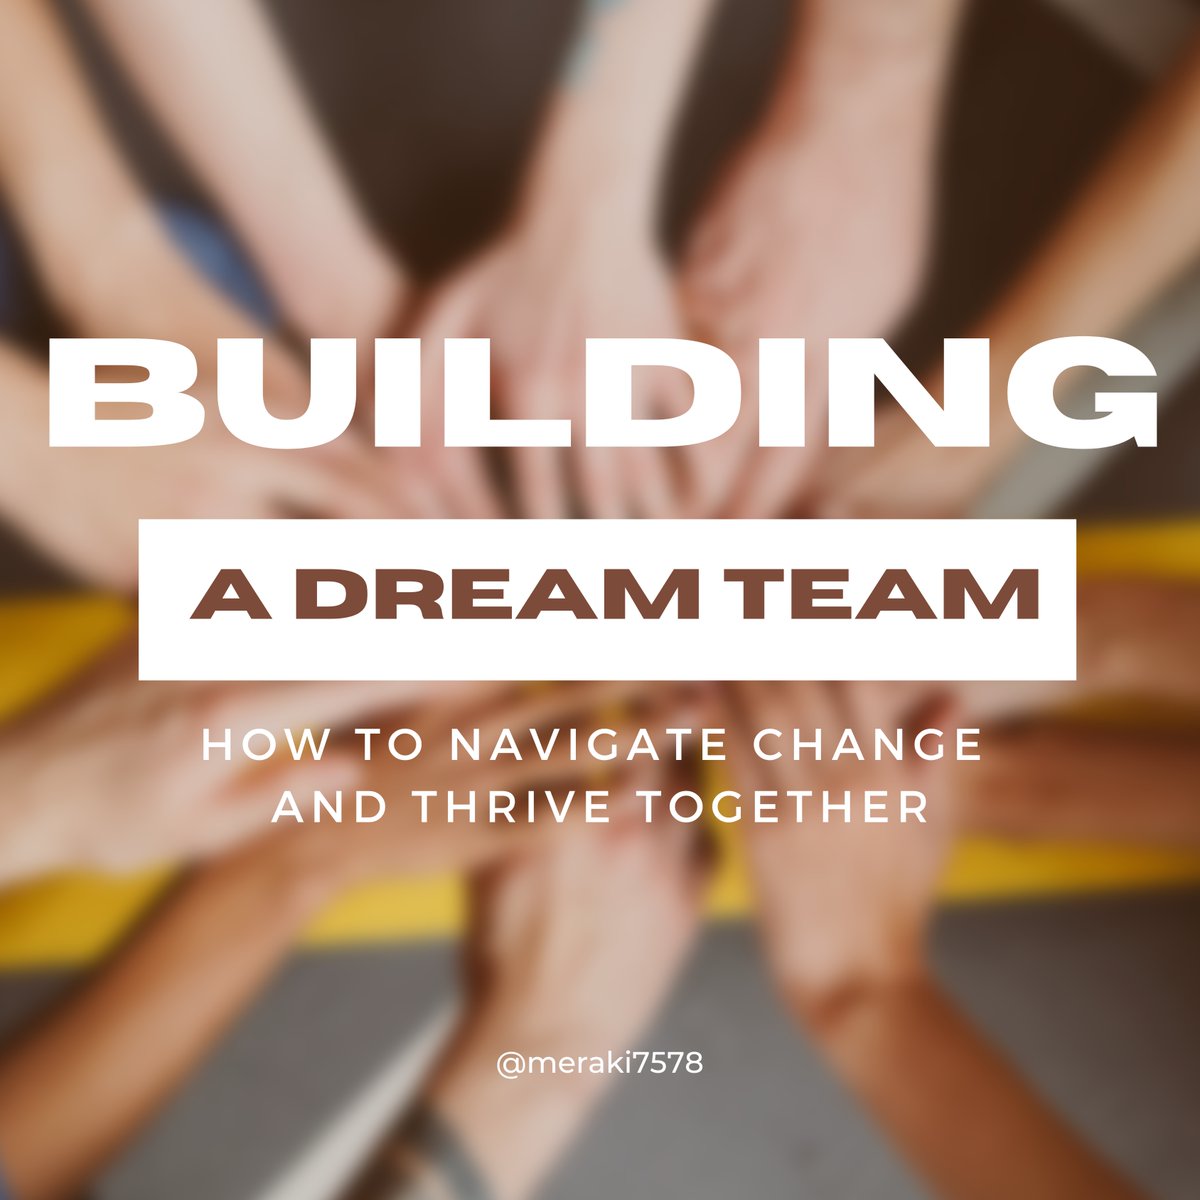 1/🧵
How many of you can honestly say you had a great workday today? 
It's all about teamwork! 
Teamwork makes the dream work, but what happens when there's a shakeup?

#teamworkmakesthedreamwork  #communication